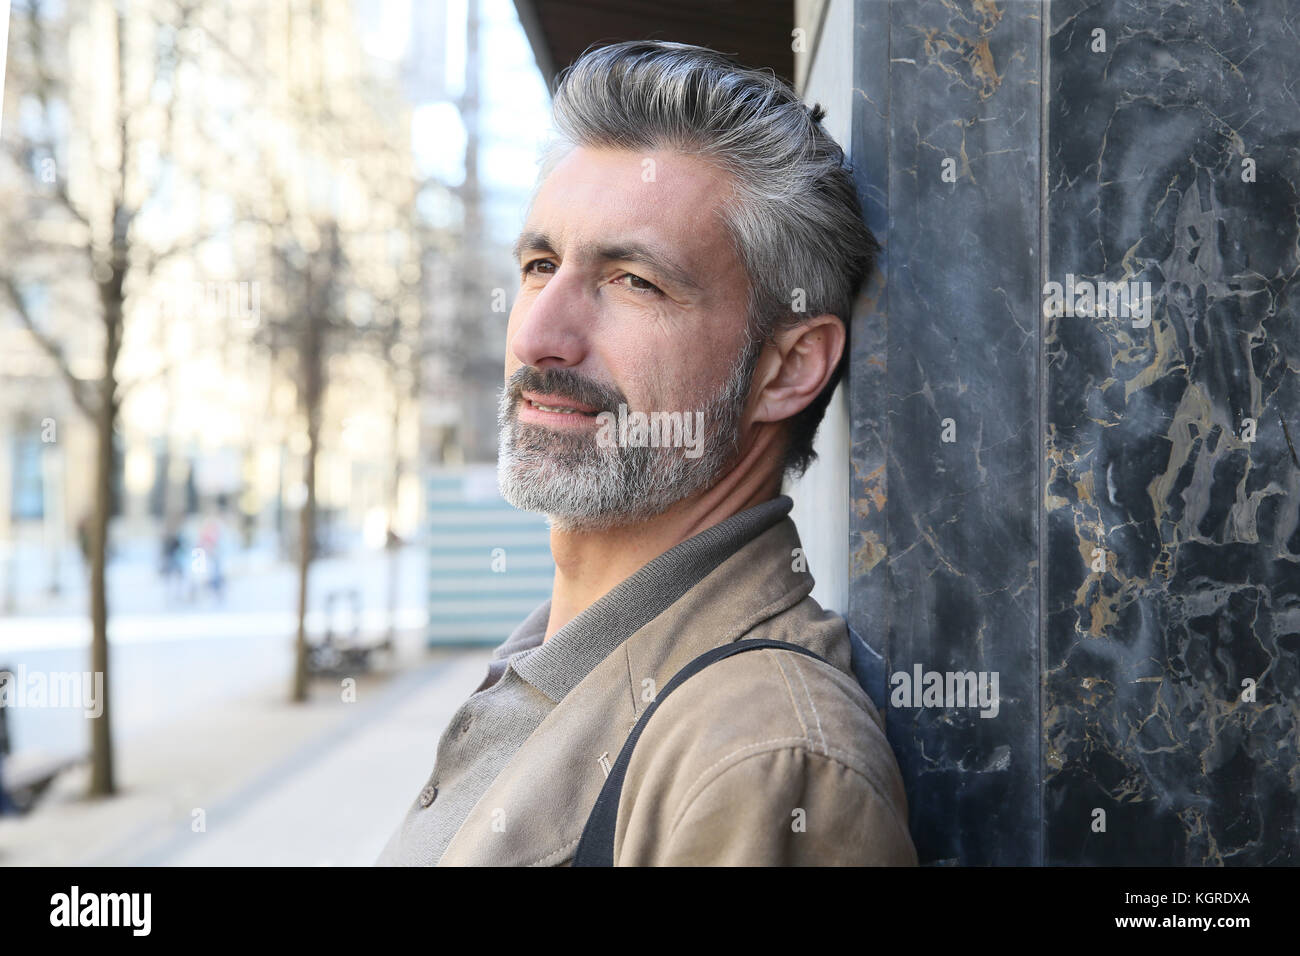 Mature man leaning on building wall in town Stock Photo